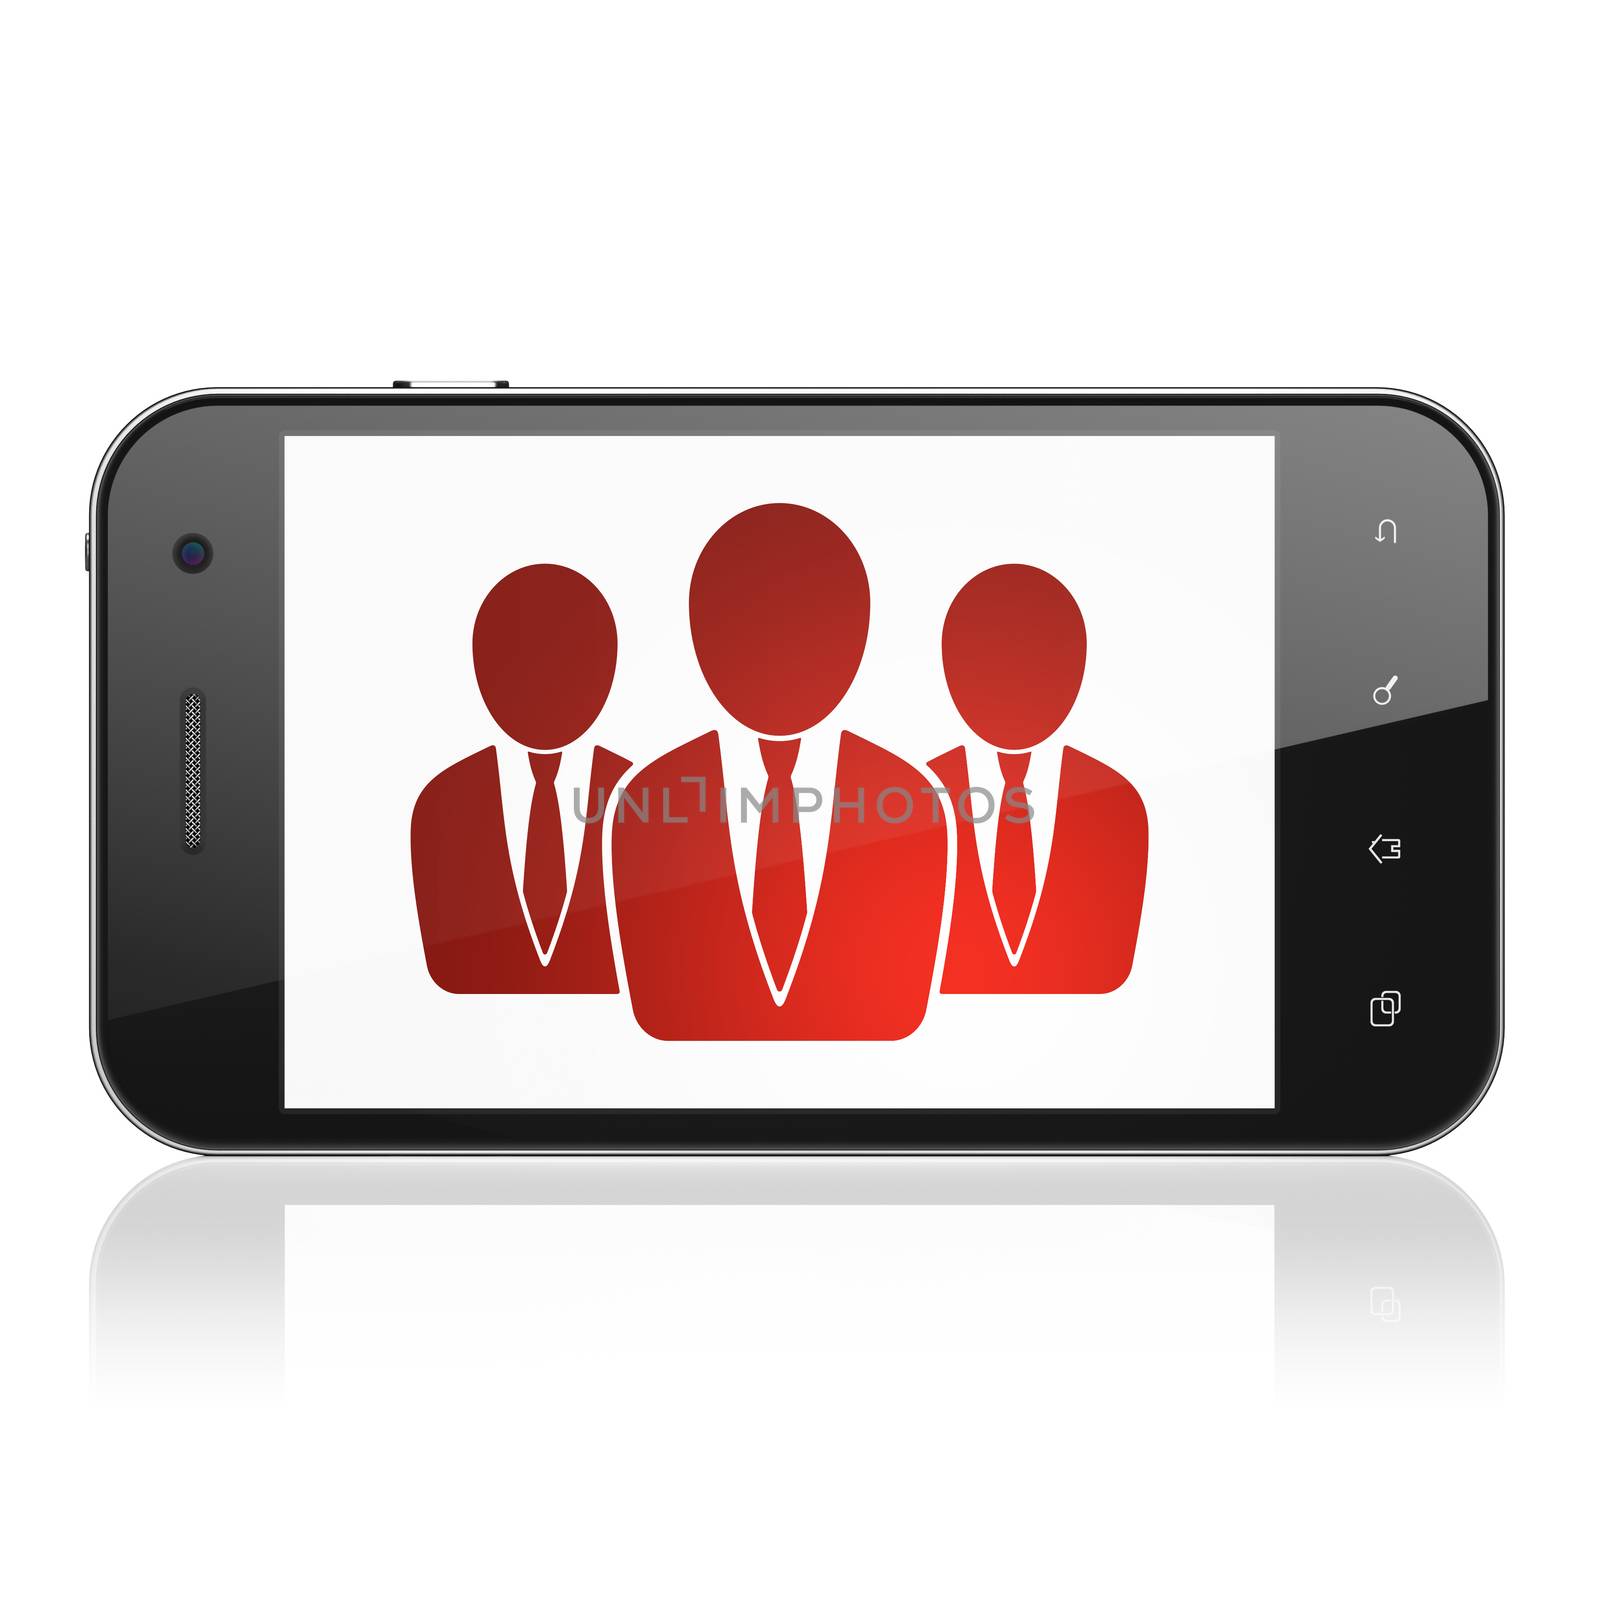 Business concept: smartphone with Business People icon on display. Mobile smart phone on White background, cell phone 3d render